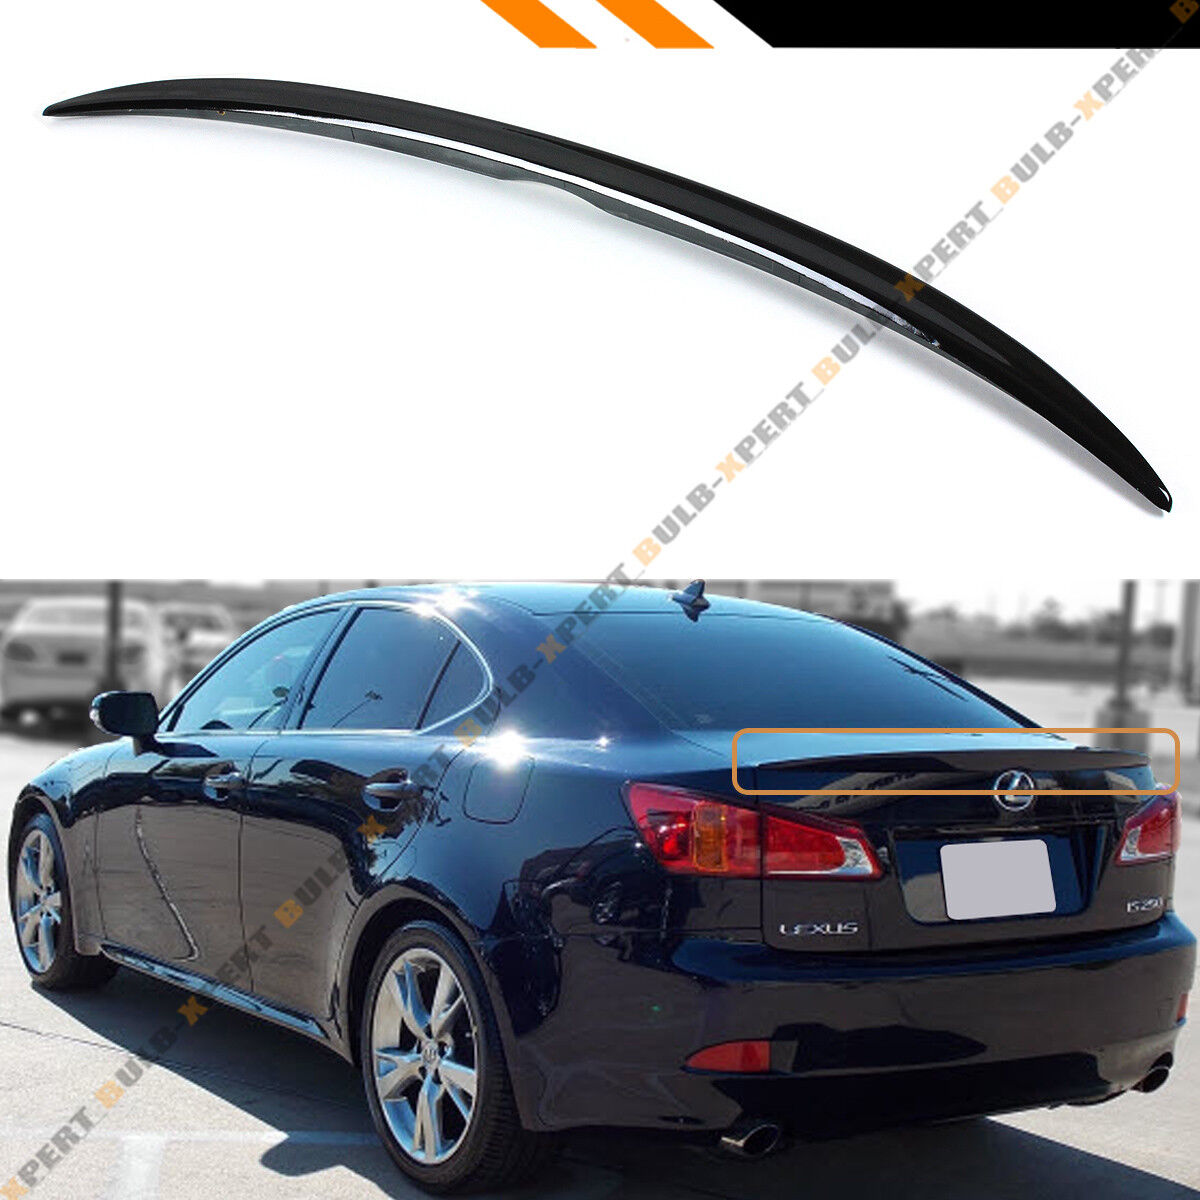 FOR 2006-13 LEXUS IS 250/350/ ISF VIP PAINTED GLOSSY BLK REAR TRUNK LID SPOILER